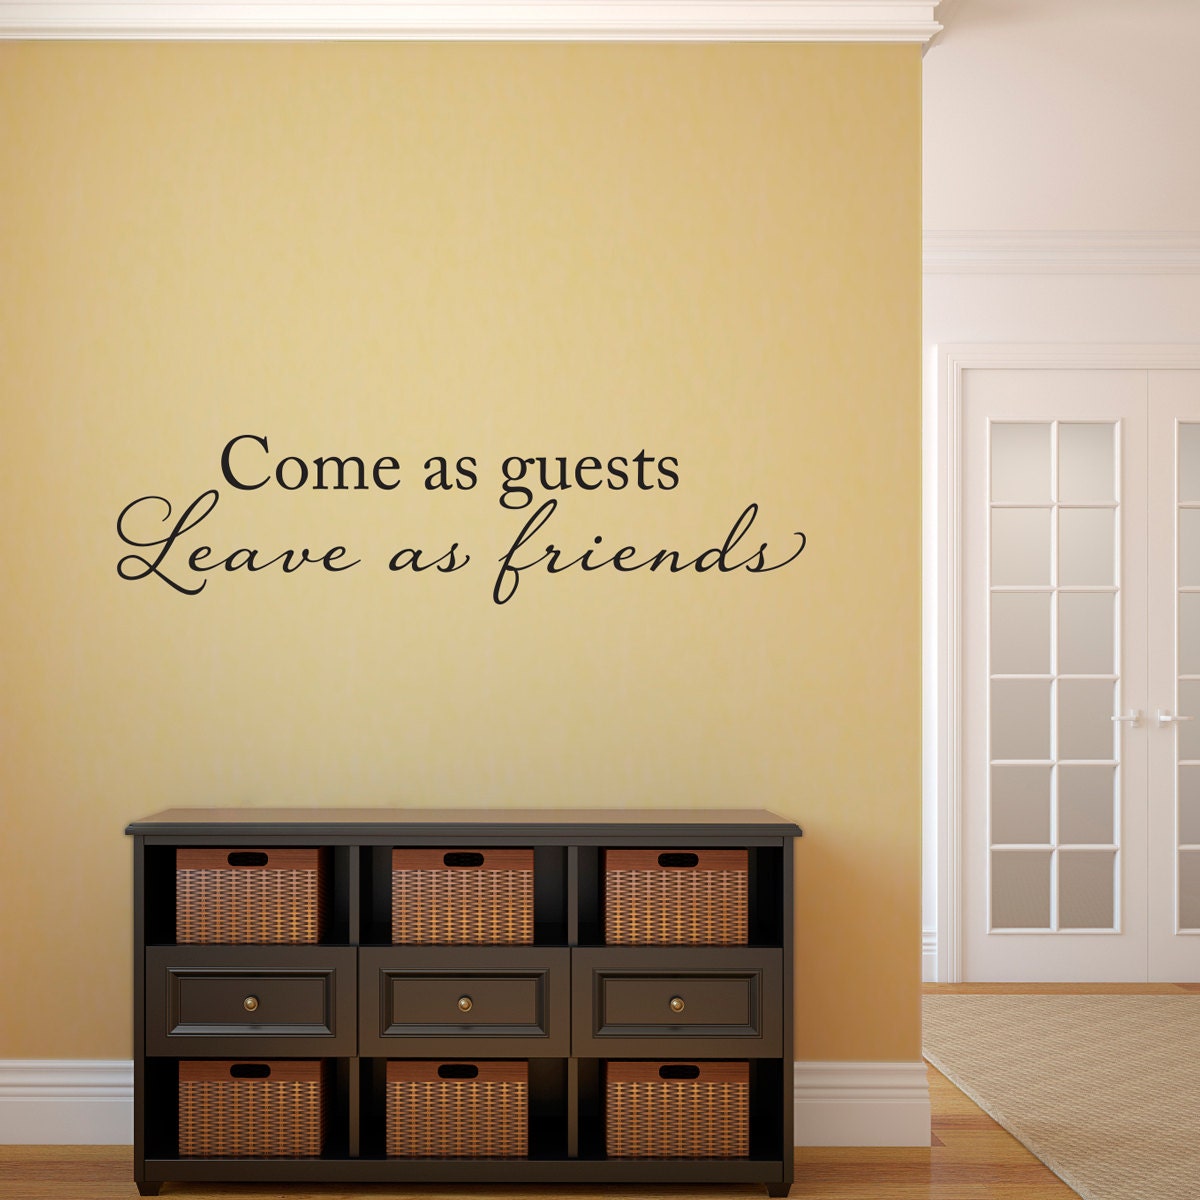 Come as Guests Leave as Friends Decal - Entryway Decor - Foyer Decal - Welcome Guests Quote